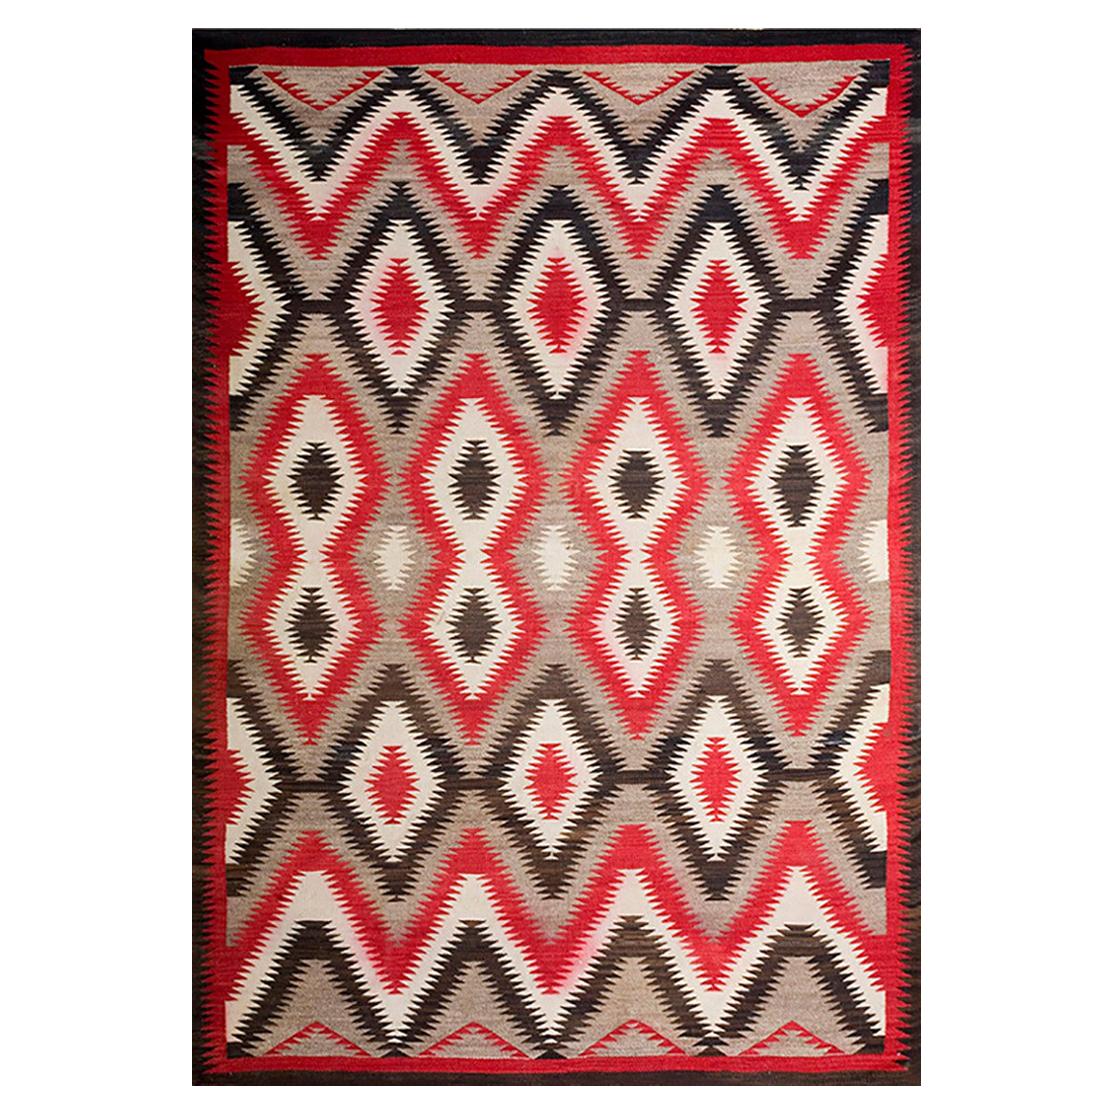 Early 20th Century American Navajo Carpet  ( 6'3" x 9' - 191 x 275 ) For Sale